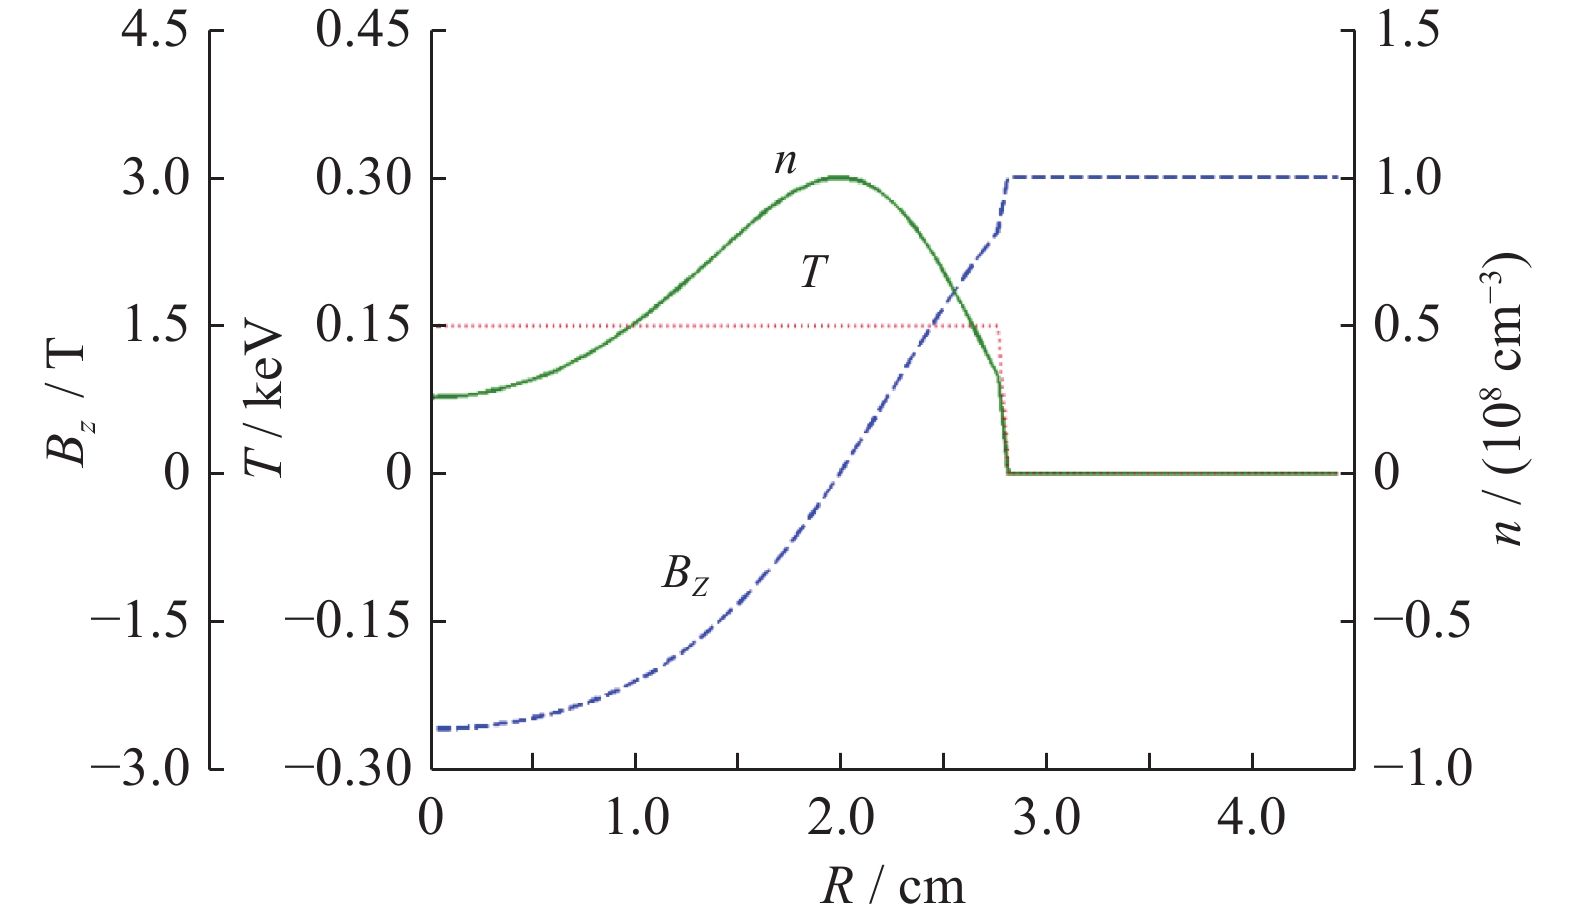 The initial profile of plasma density, temperature and magnetic field